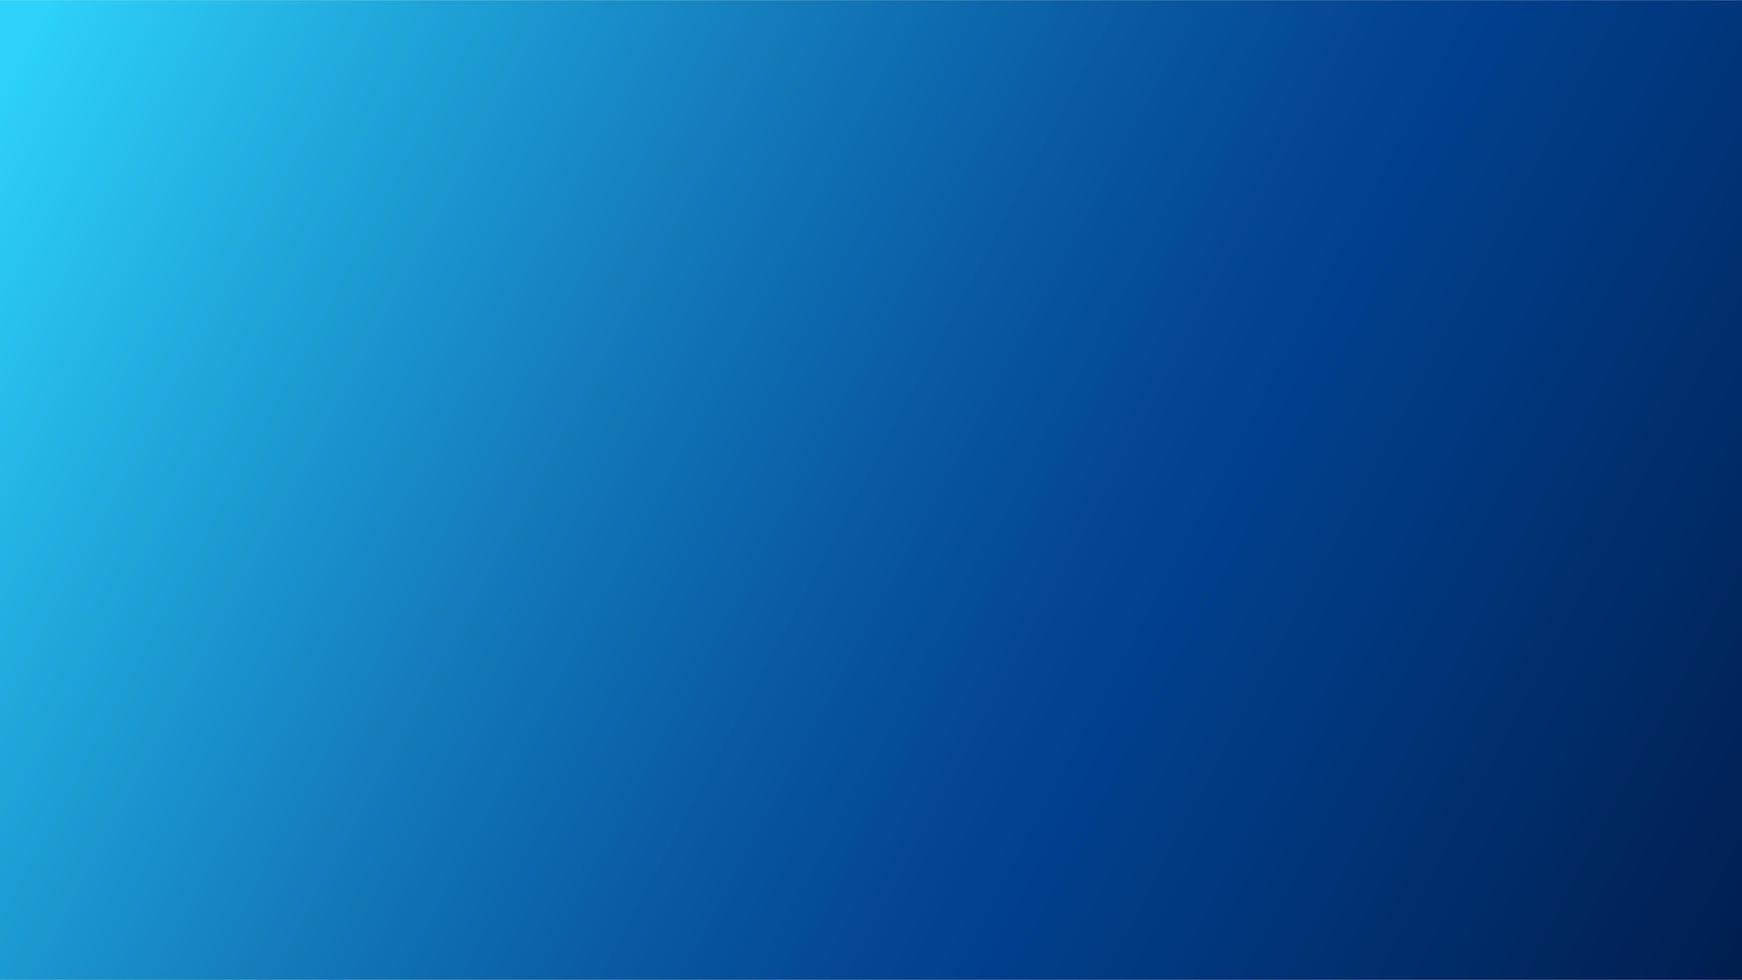 Blue Wide Background With Linear Blurred Gradient 3031764 Vector Art At